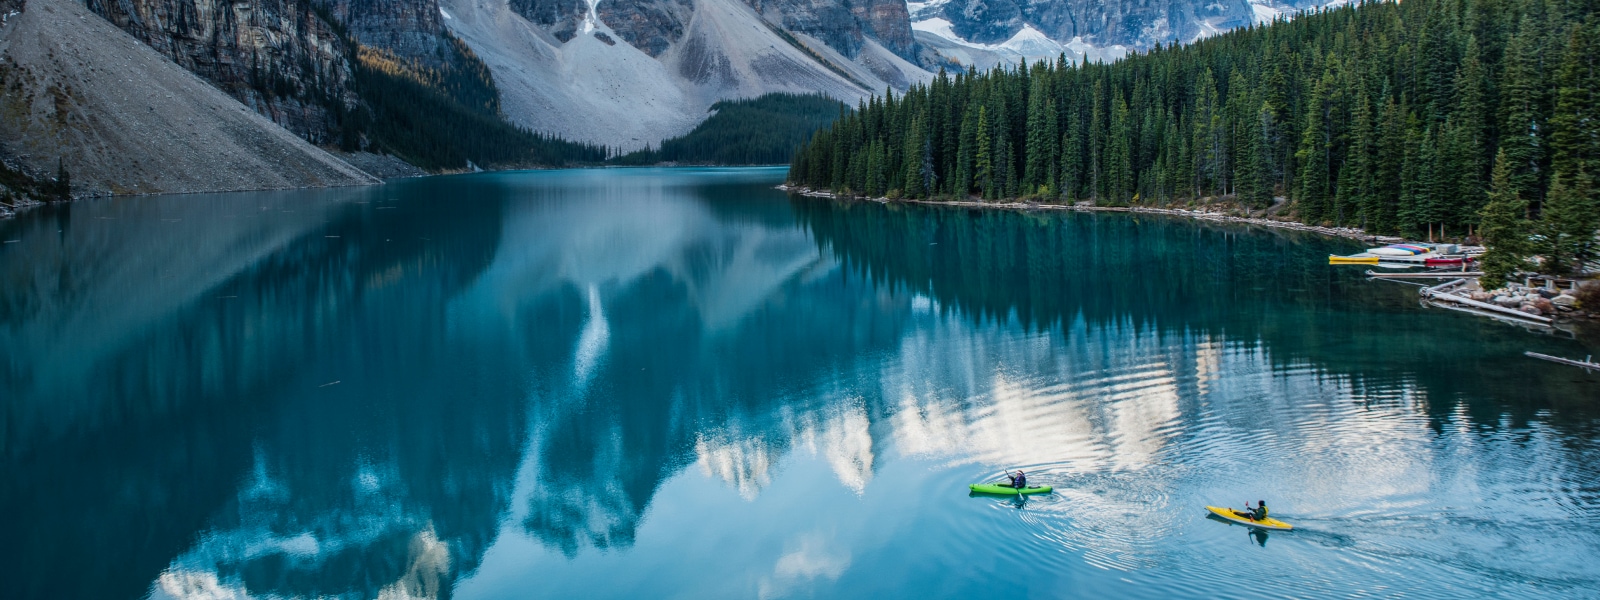 Two individuals kayaking across a lake in the middle of snowy mountains.